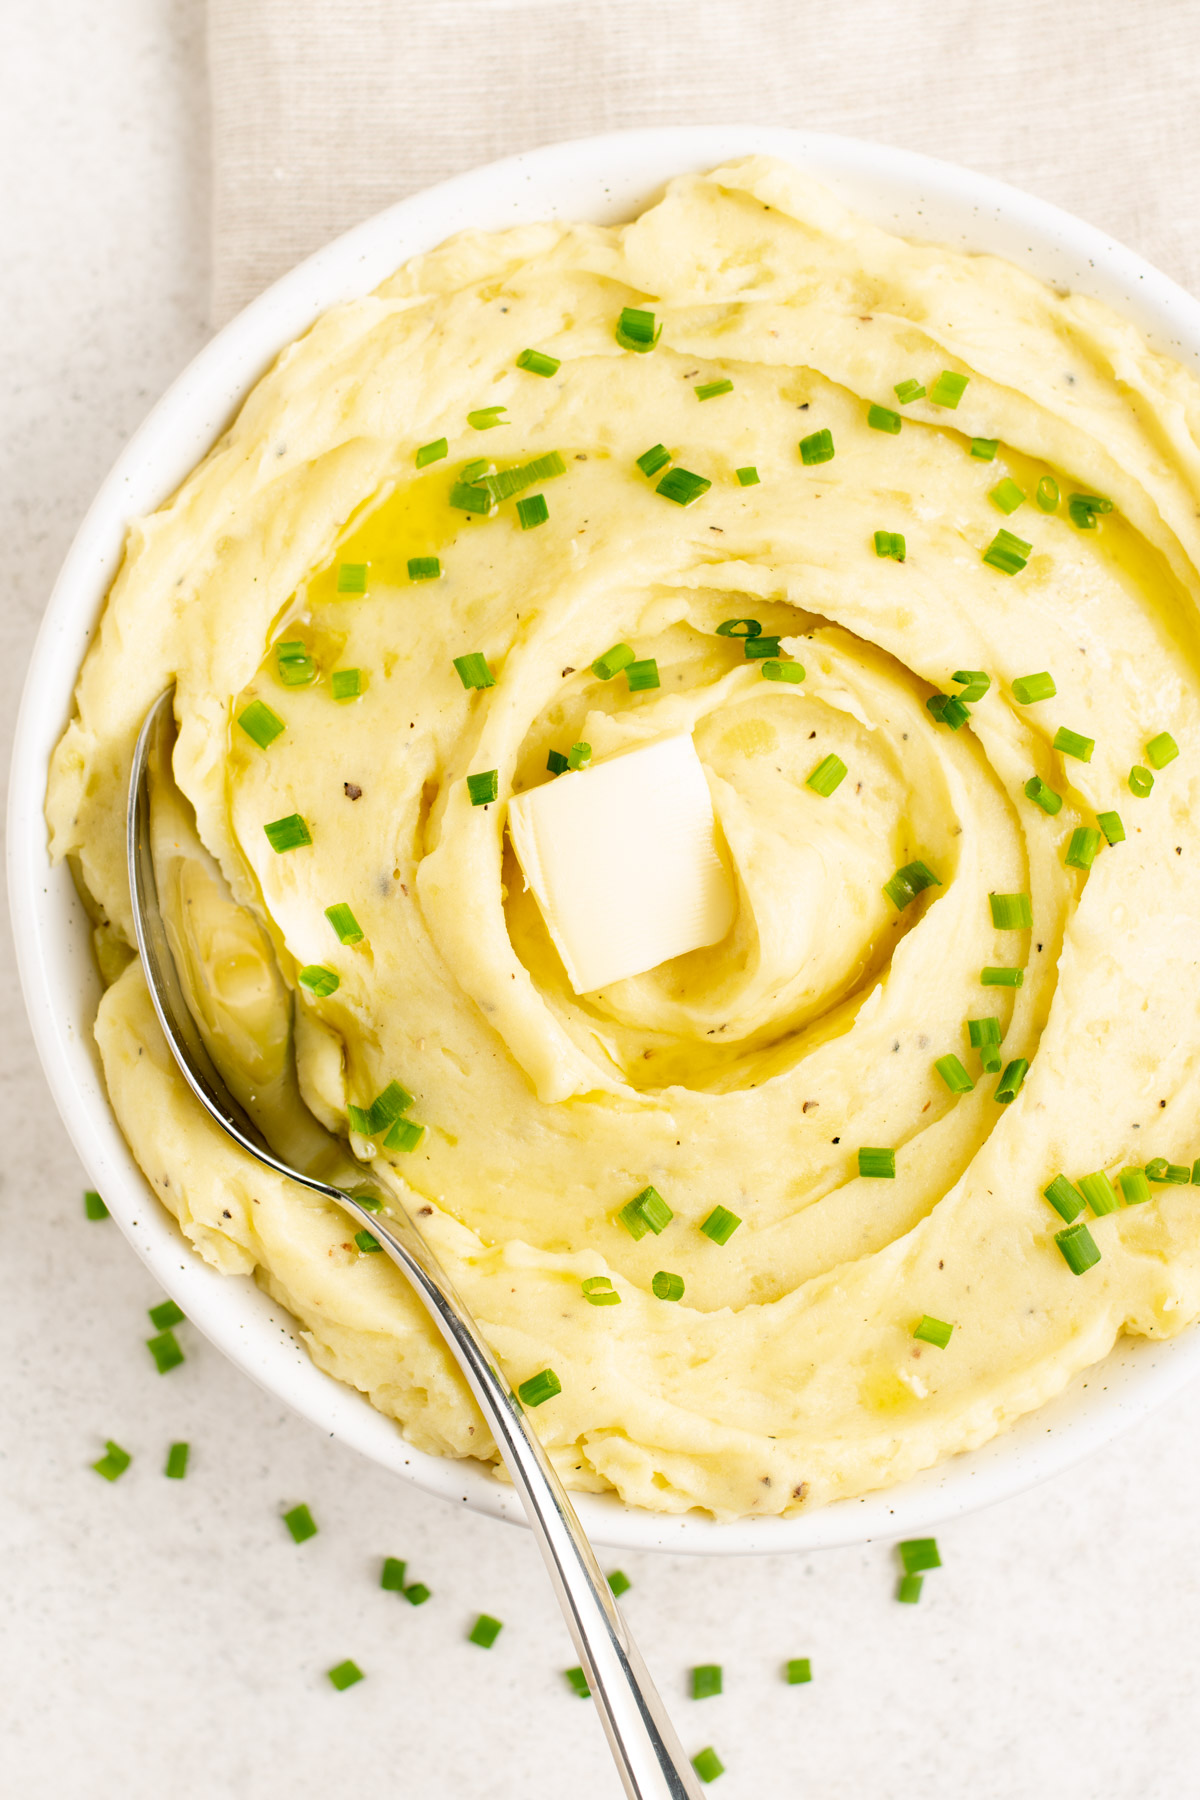 top view of a bowl of mashed potatoes topped with chives and a pad of butter.